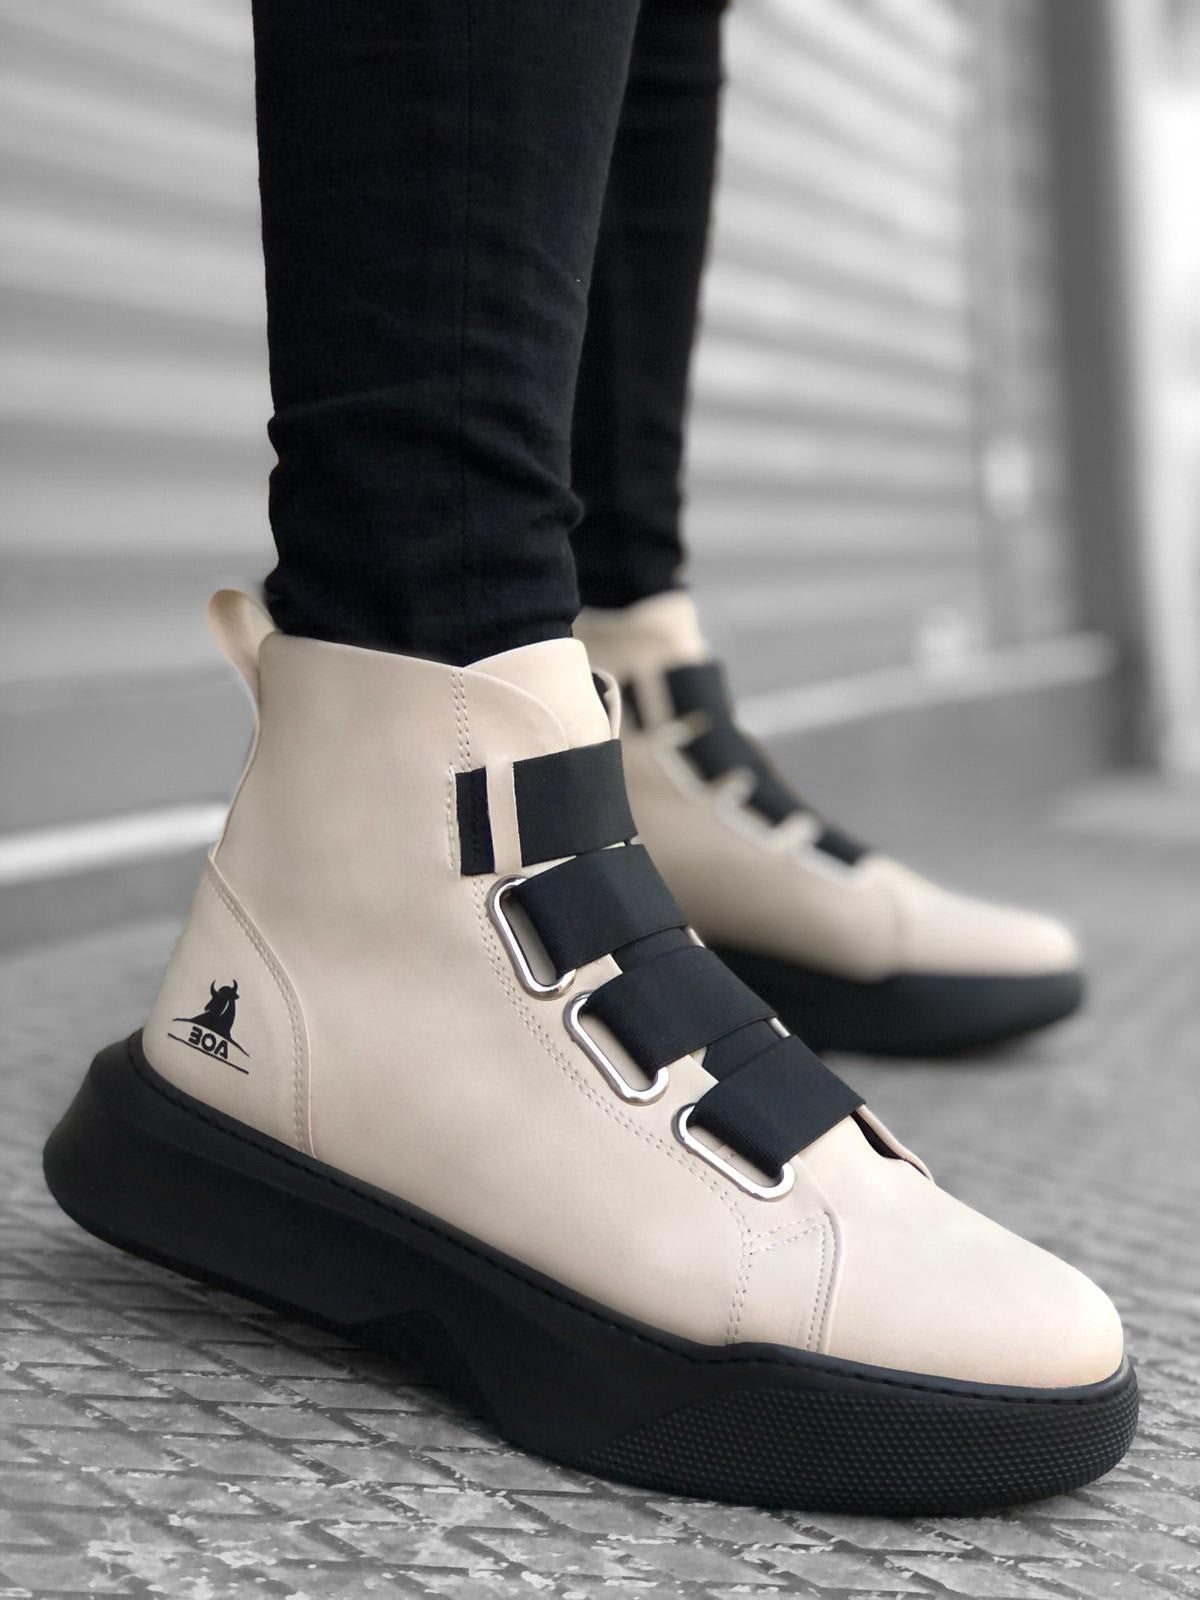 BA0142 Banded High Sole Black Sport Boots - Men Fashion Sneaker Shoes Men's Sneaker Boots - STREETMODE™